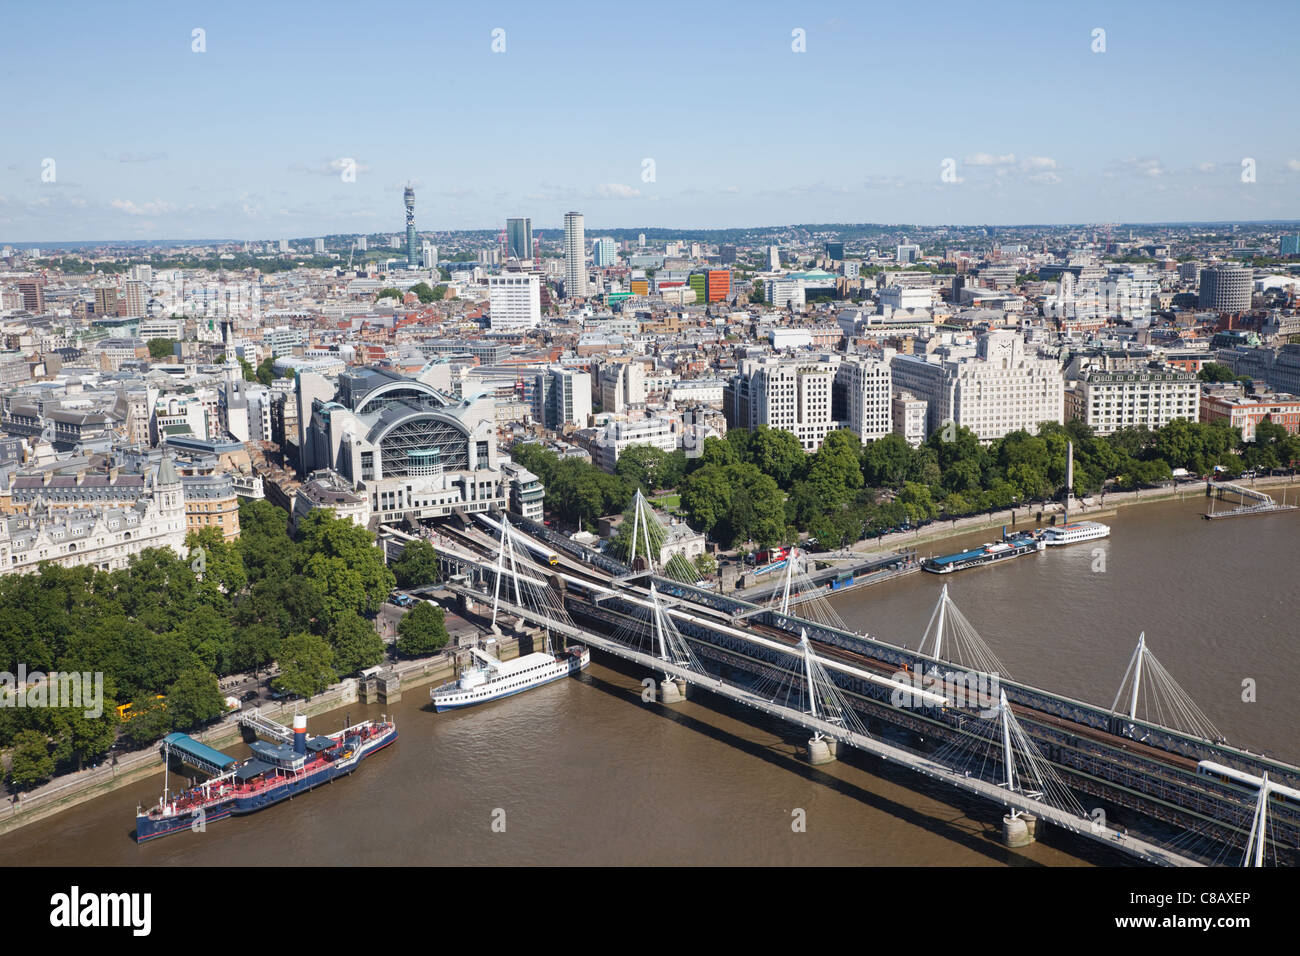 England, London, Hungerford Bridge and River Thames, View from the London Eye Stock Photo